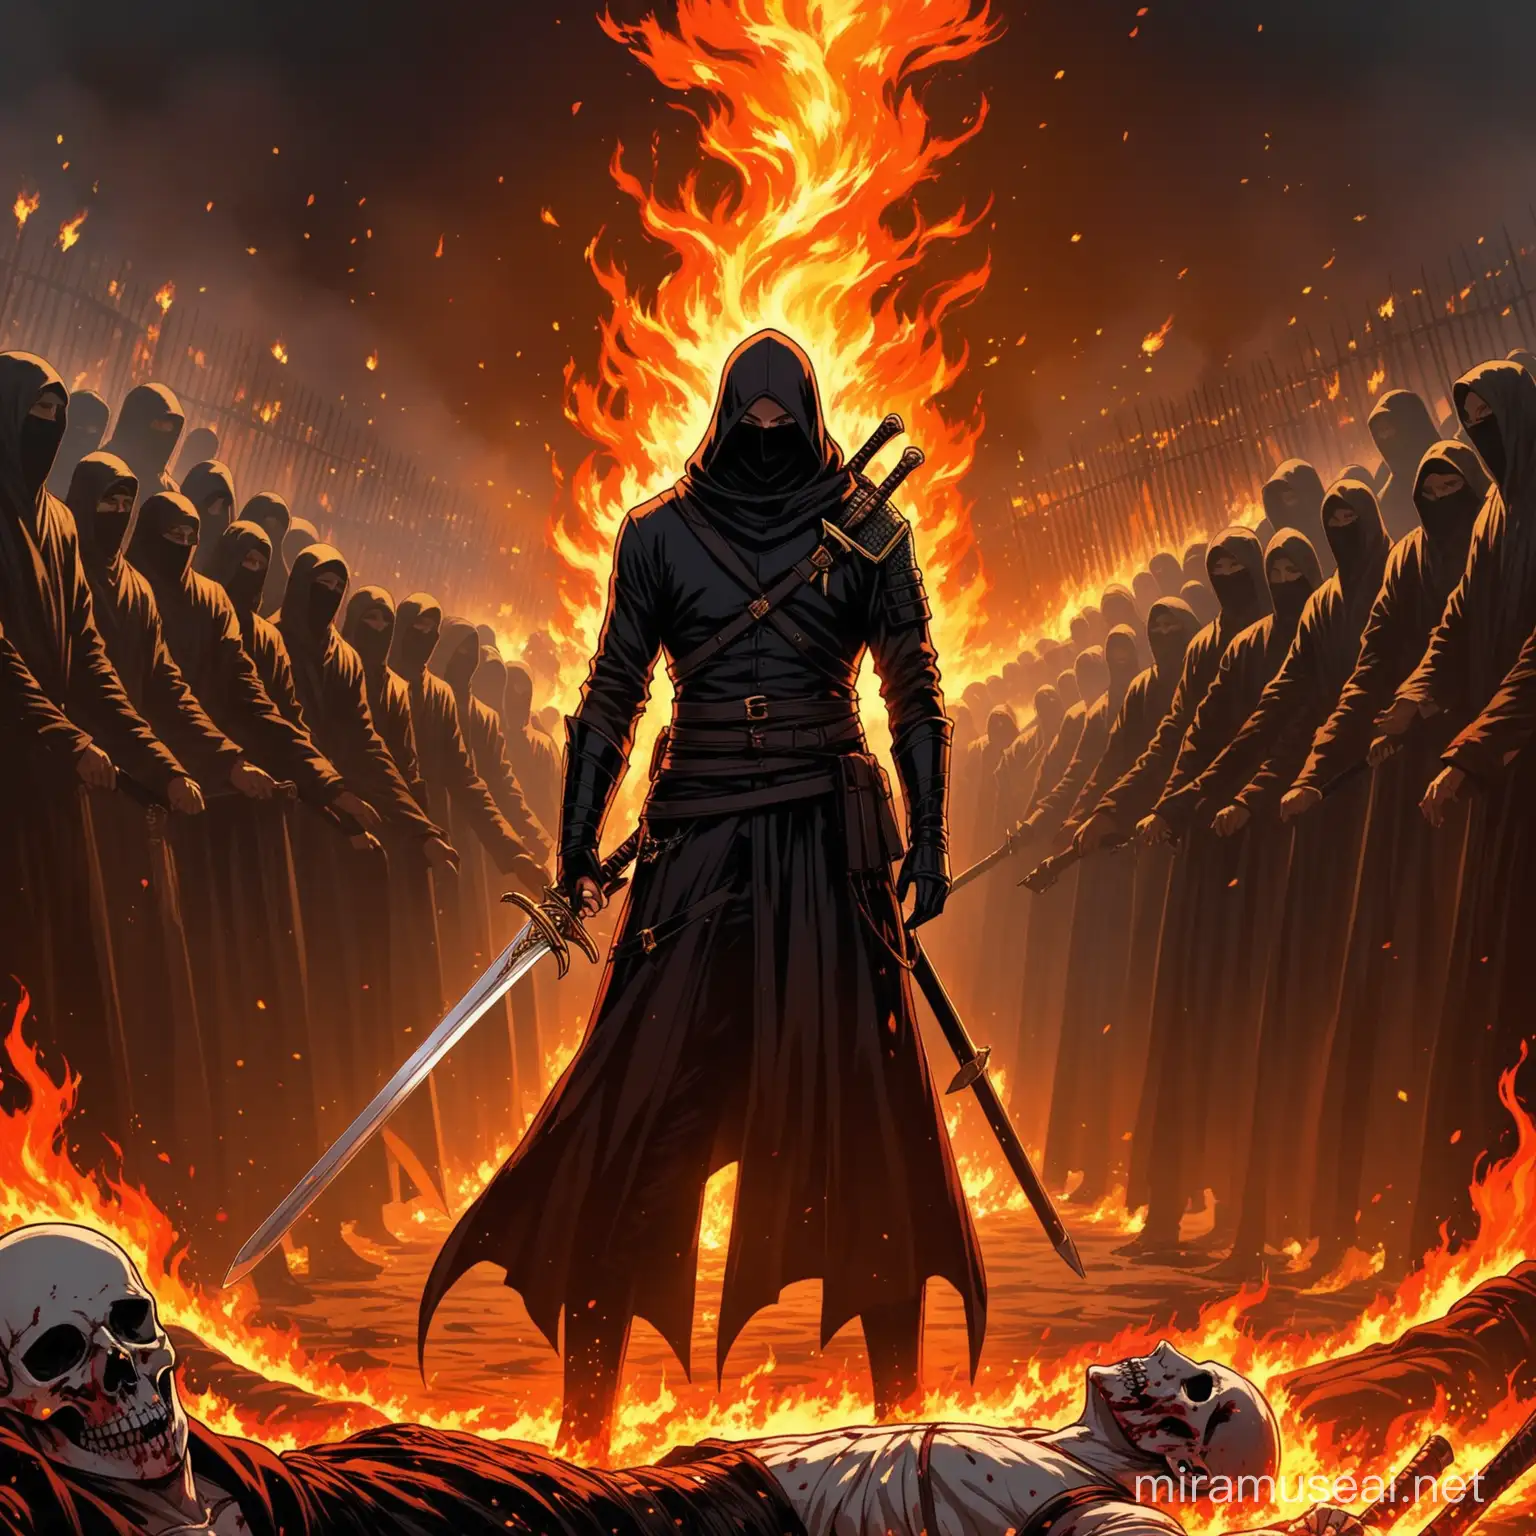 An assassin just only one standing between dead bodies that he killed with his sword and there is fire all over the place with no one behind him he is the only one in the picture